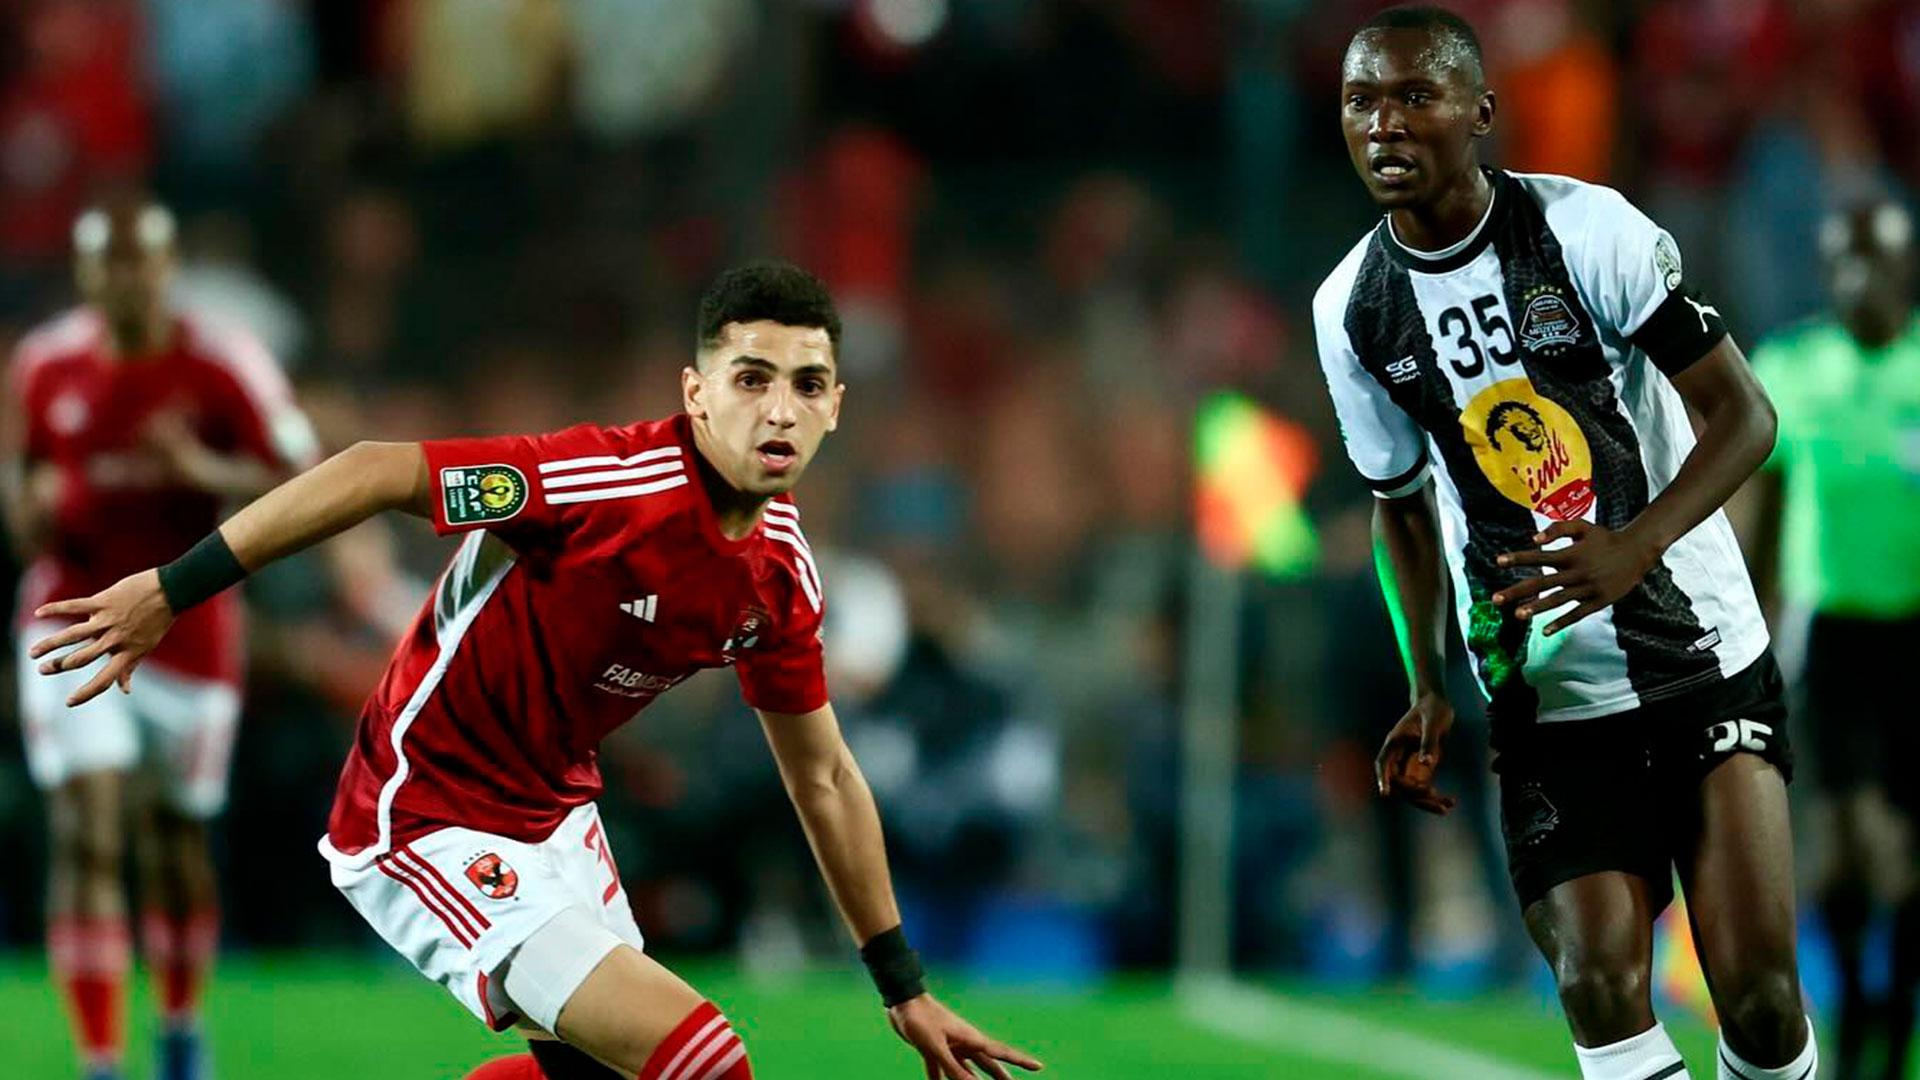 VIDEO | CAF CHAMPIONS LEAGUE Semifinals Highlights: Al Ahly (EGY) vs TP Mazembe (COD)